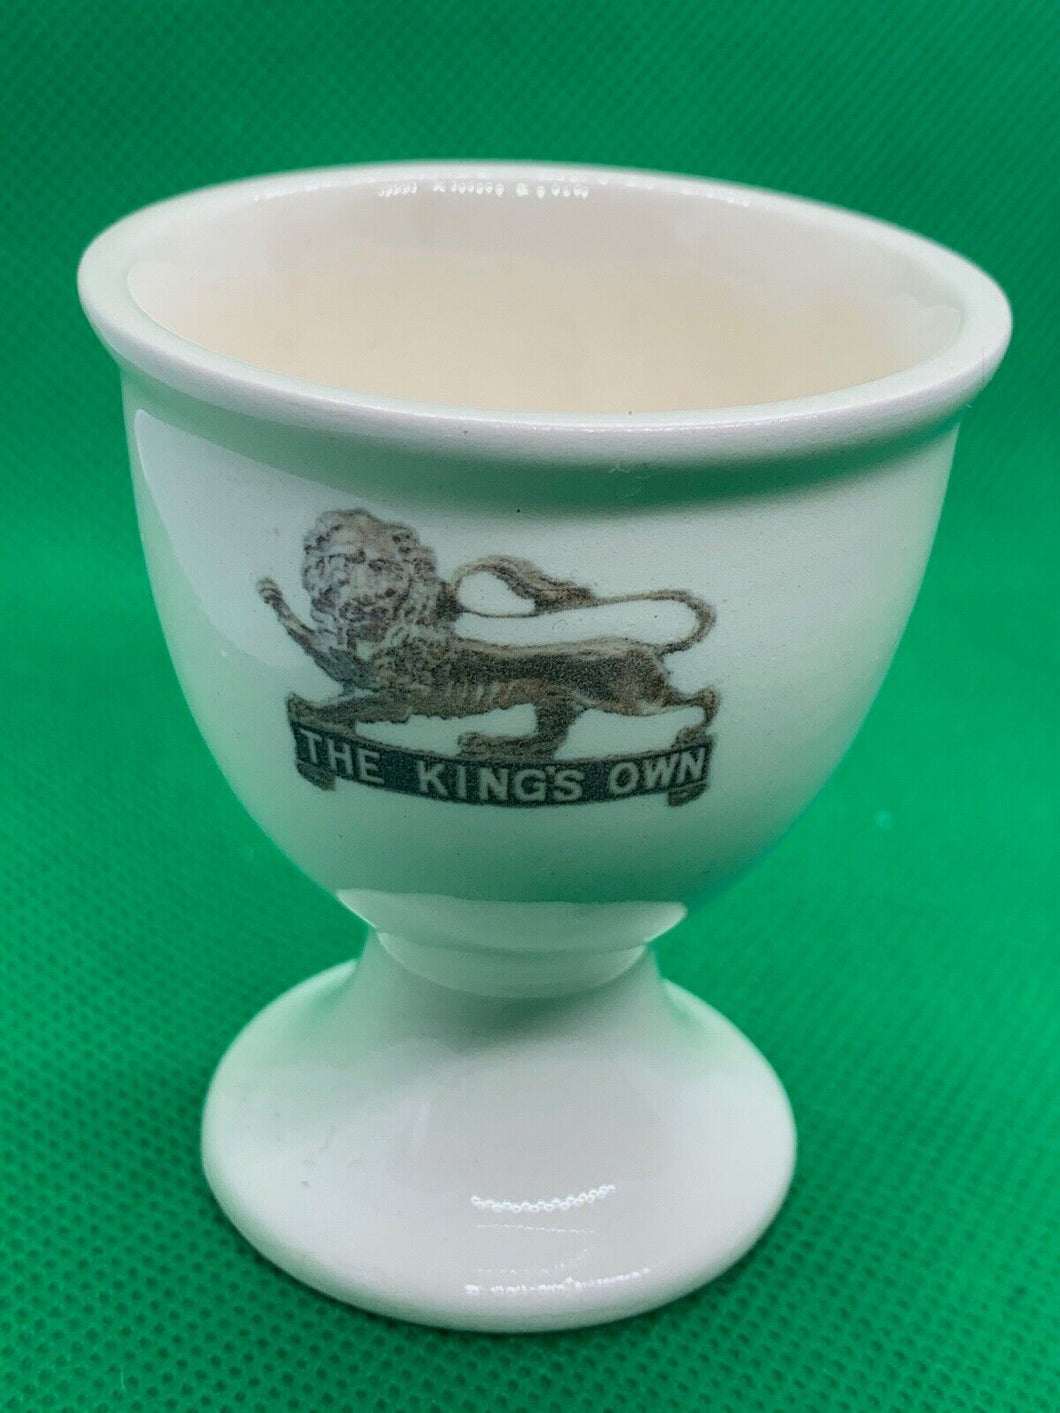 Badges of Empire Collectors Series Egg Cup - The Kings Own - No 191